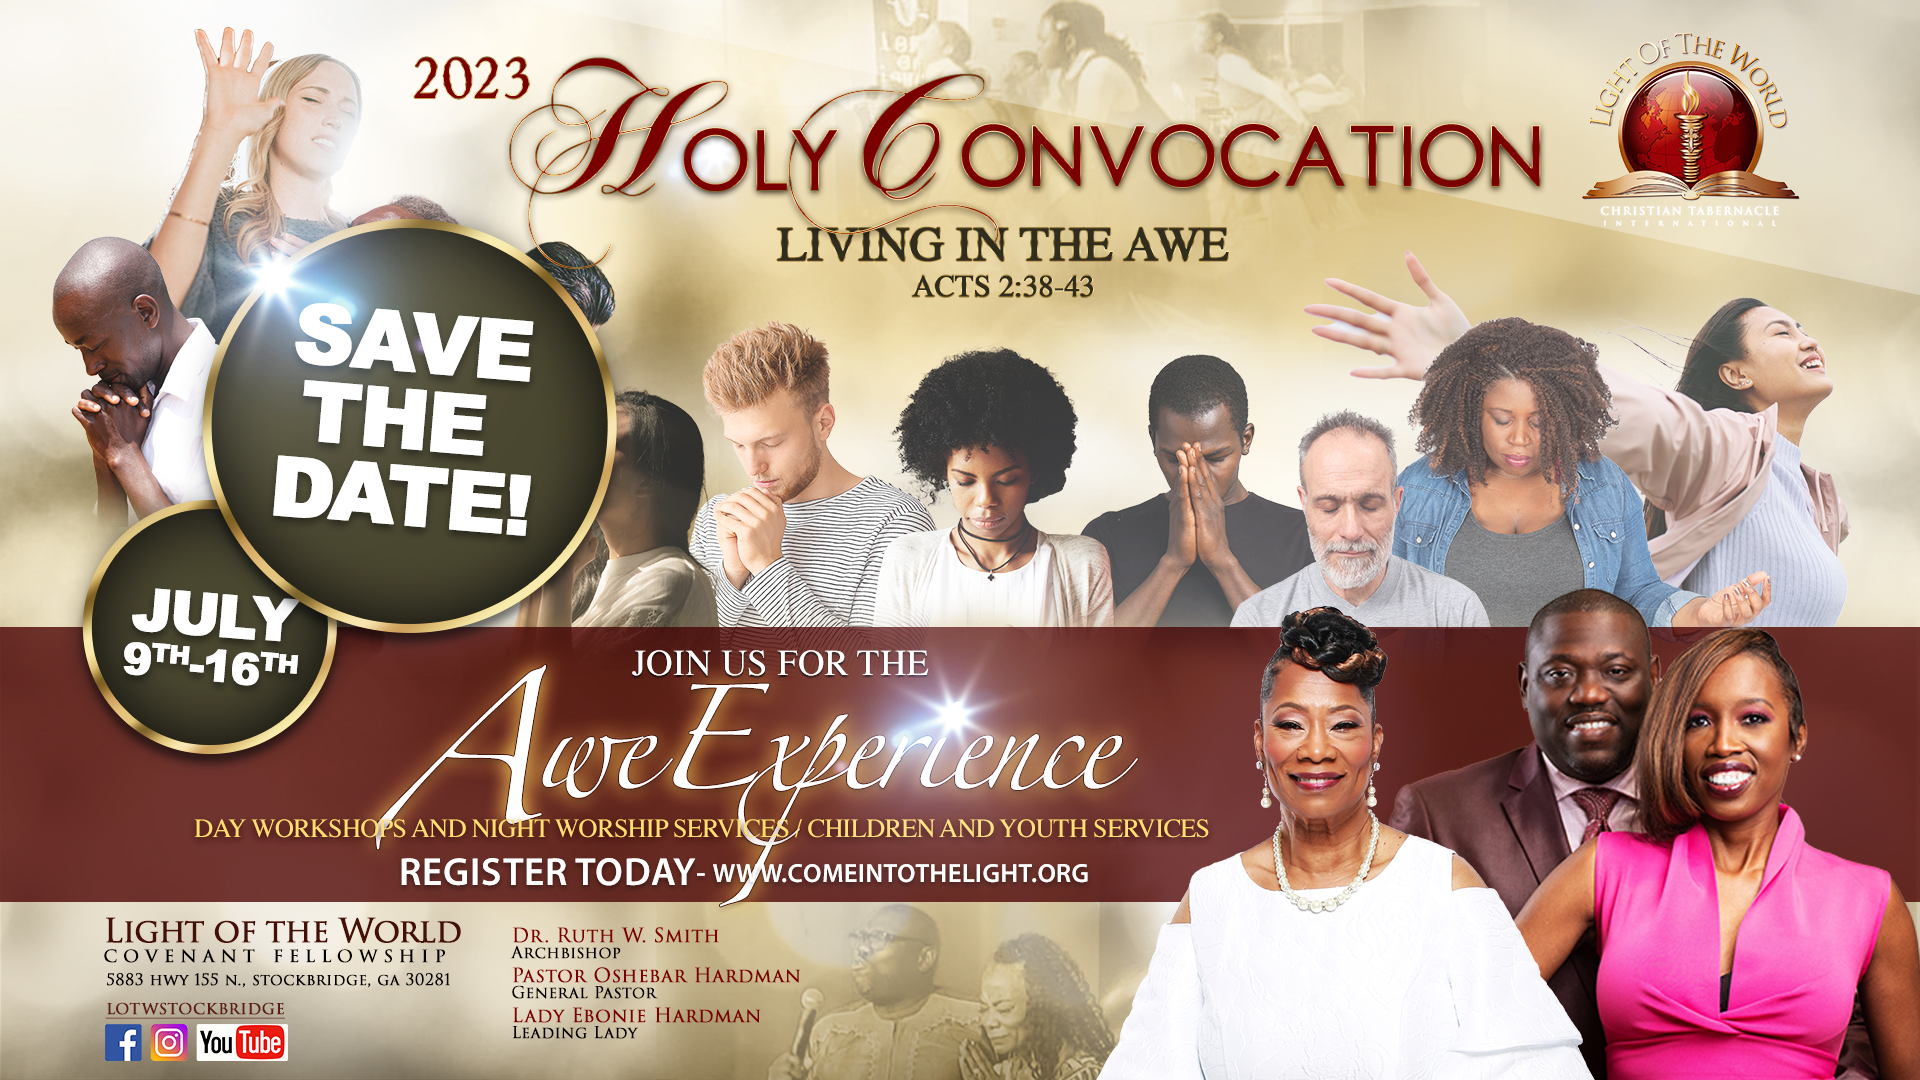 2023 Holy Convocation save the date flyer